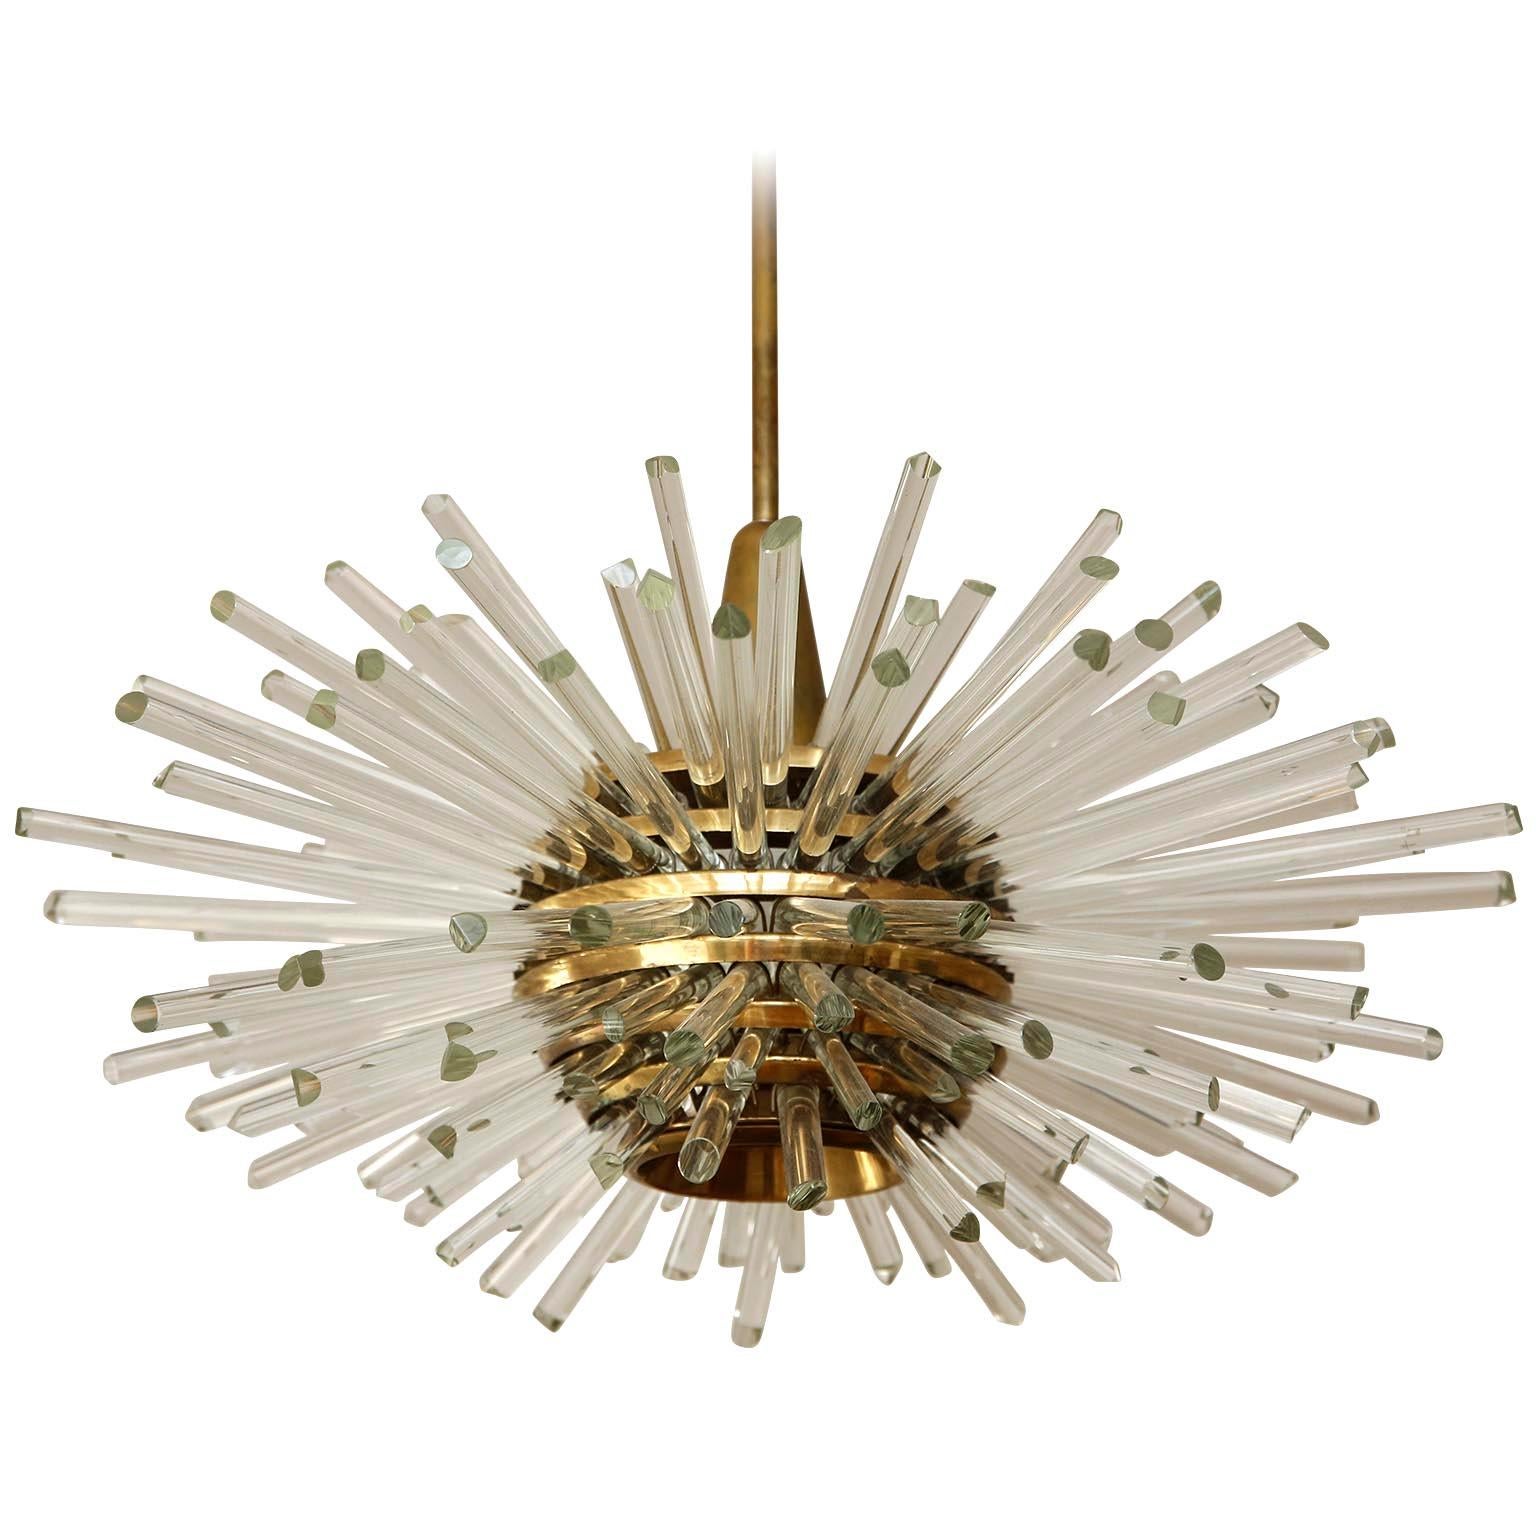 Only one light is available!
One of two fantastic Sputnik chandeliers by Bakalowits & Sohne, Austria, manufactured in midcentury (late 1960s or early 1970s). A layered multi-tier structure made of solid brass rings and glass rods with faceted ends